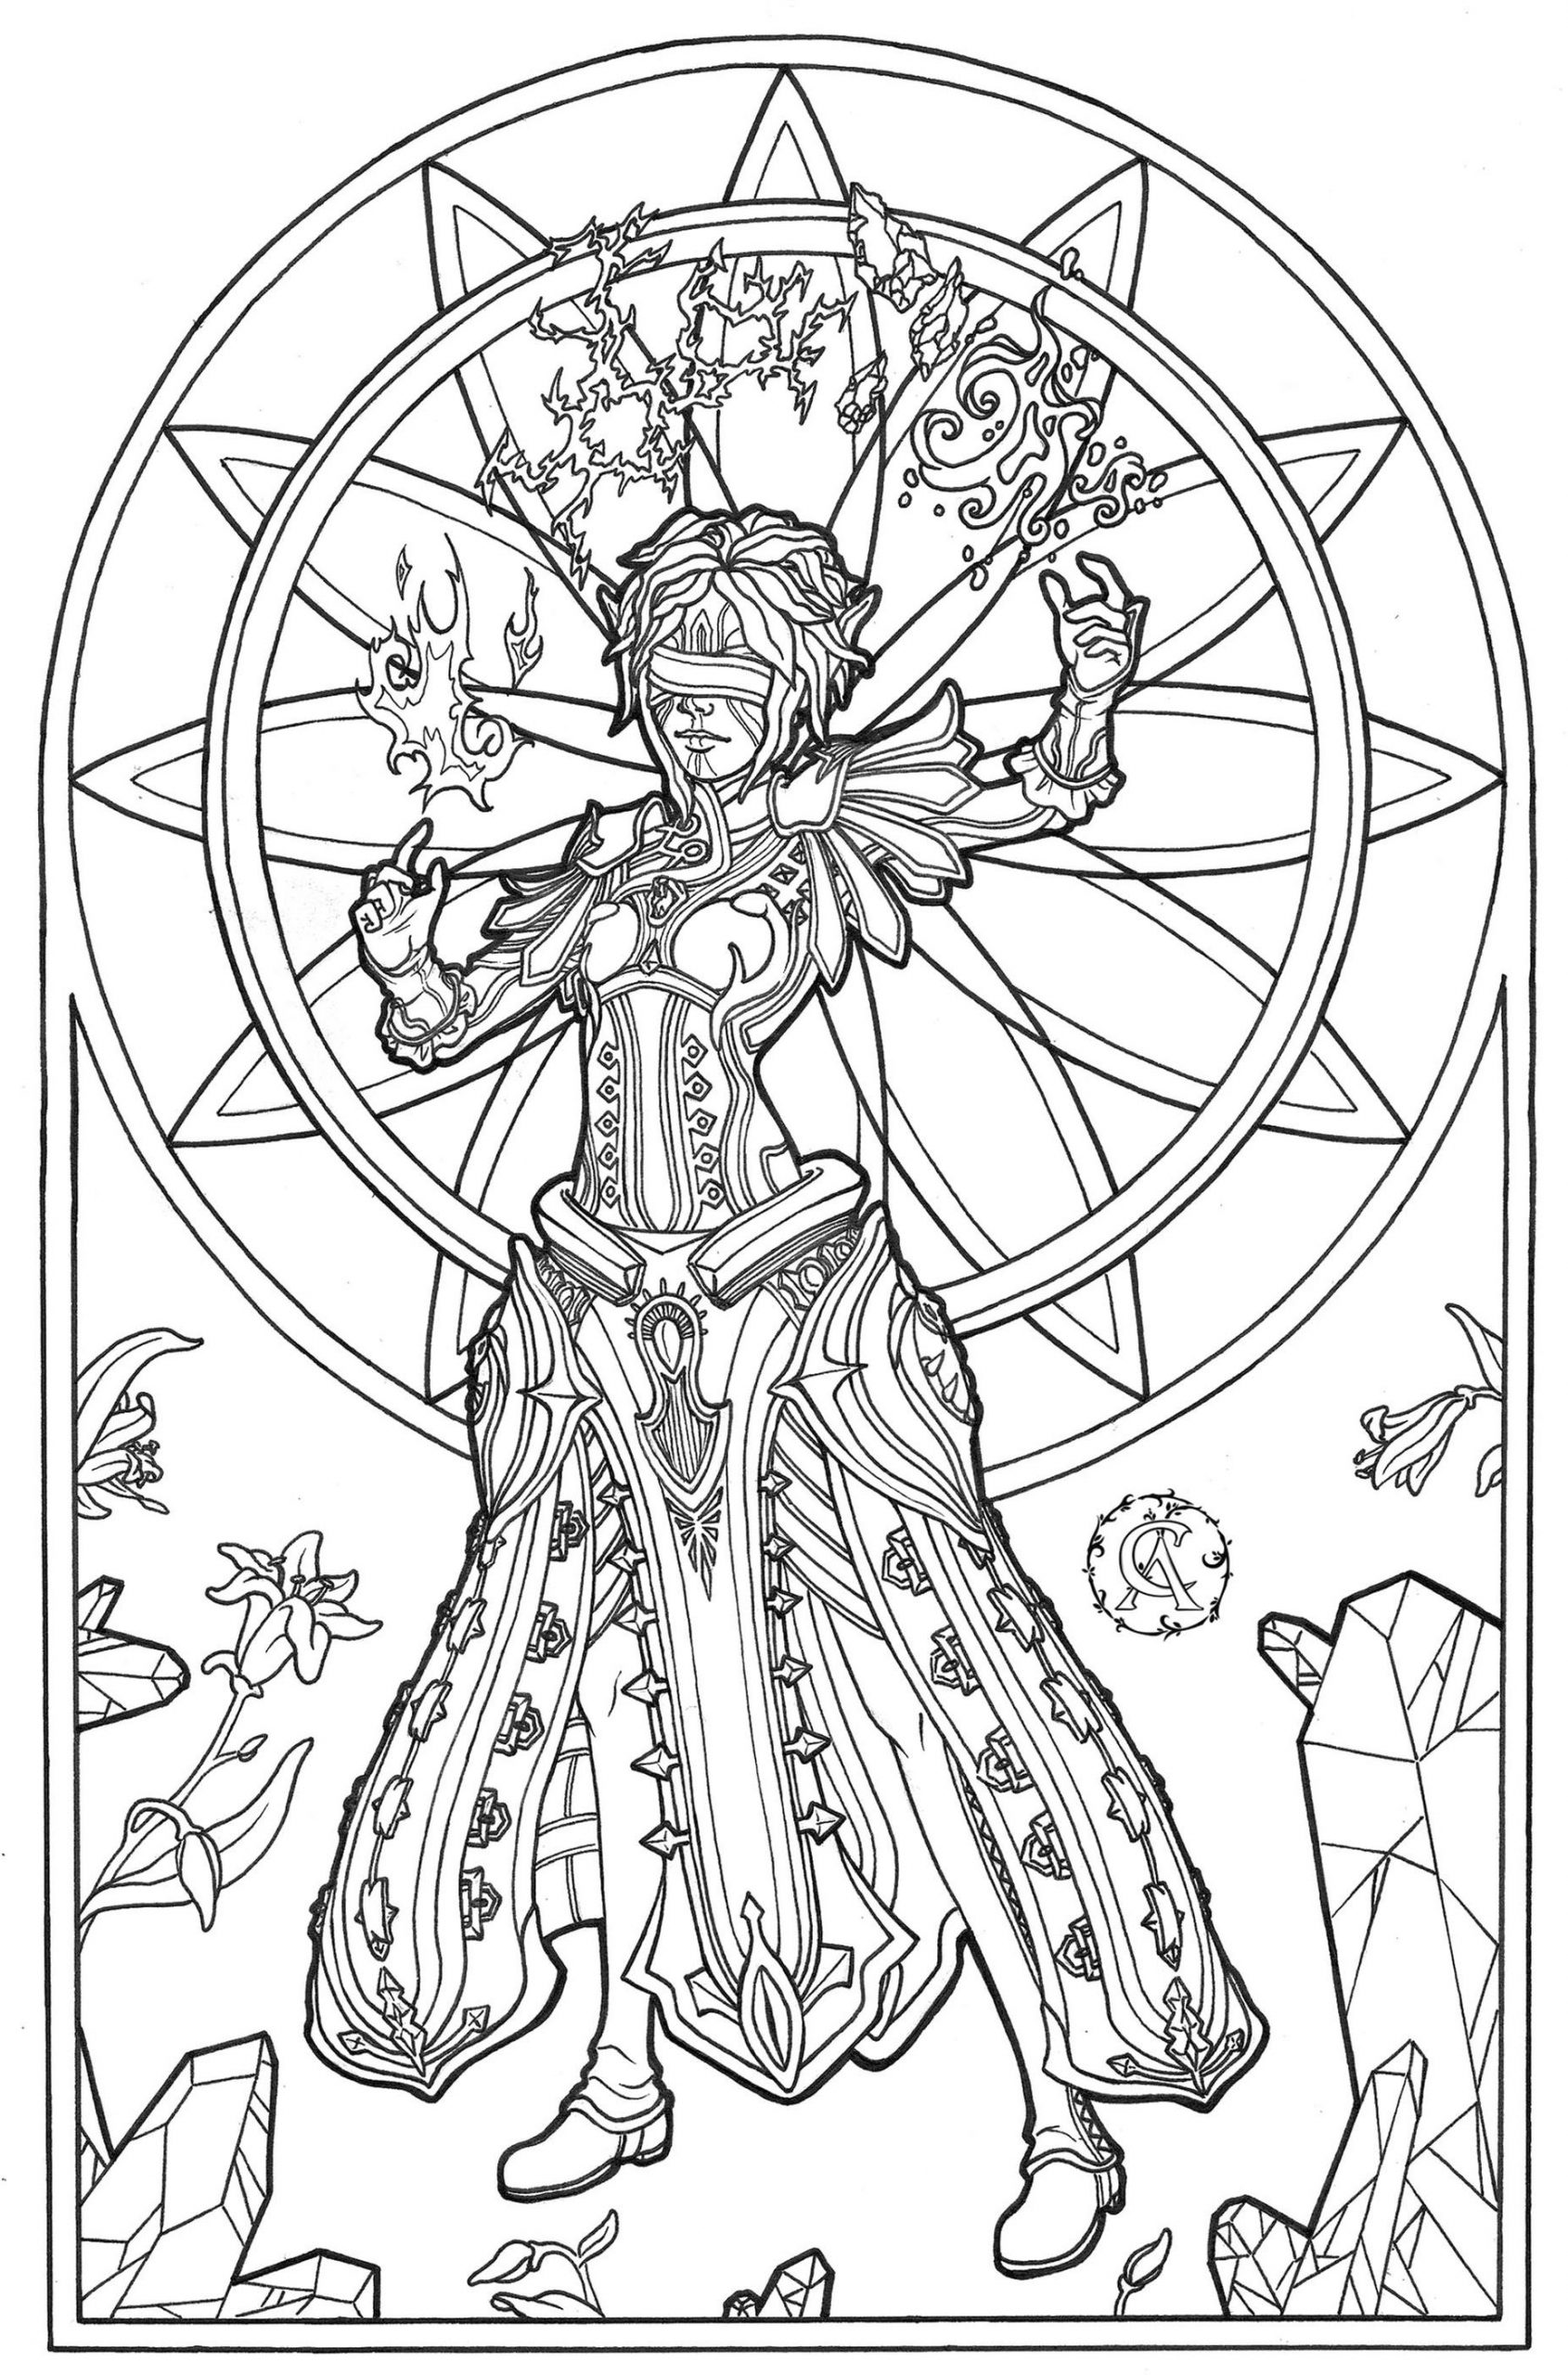 Get This Adult Fantasy Coloring Pages 4blm